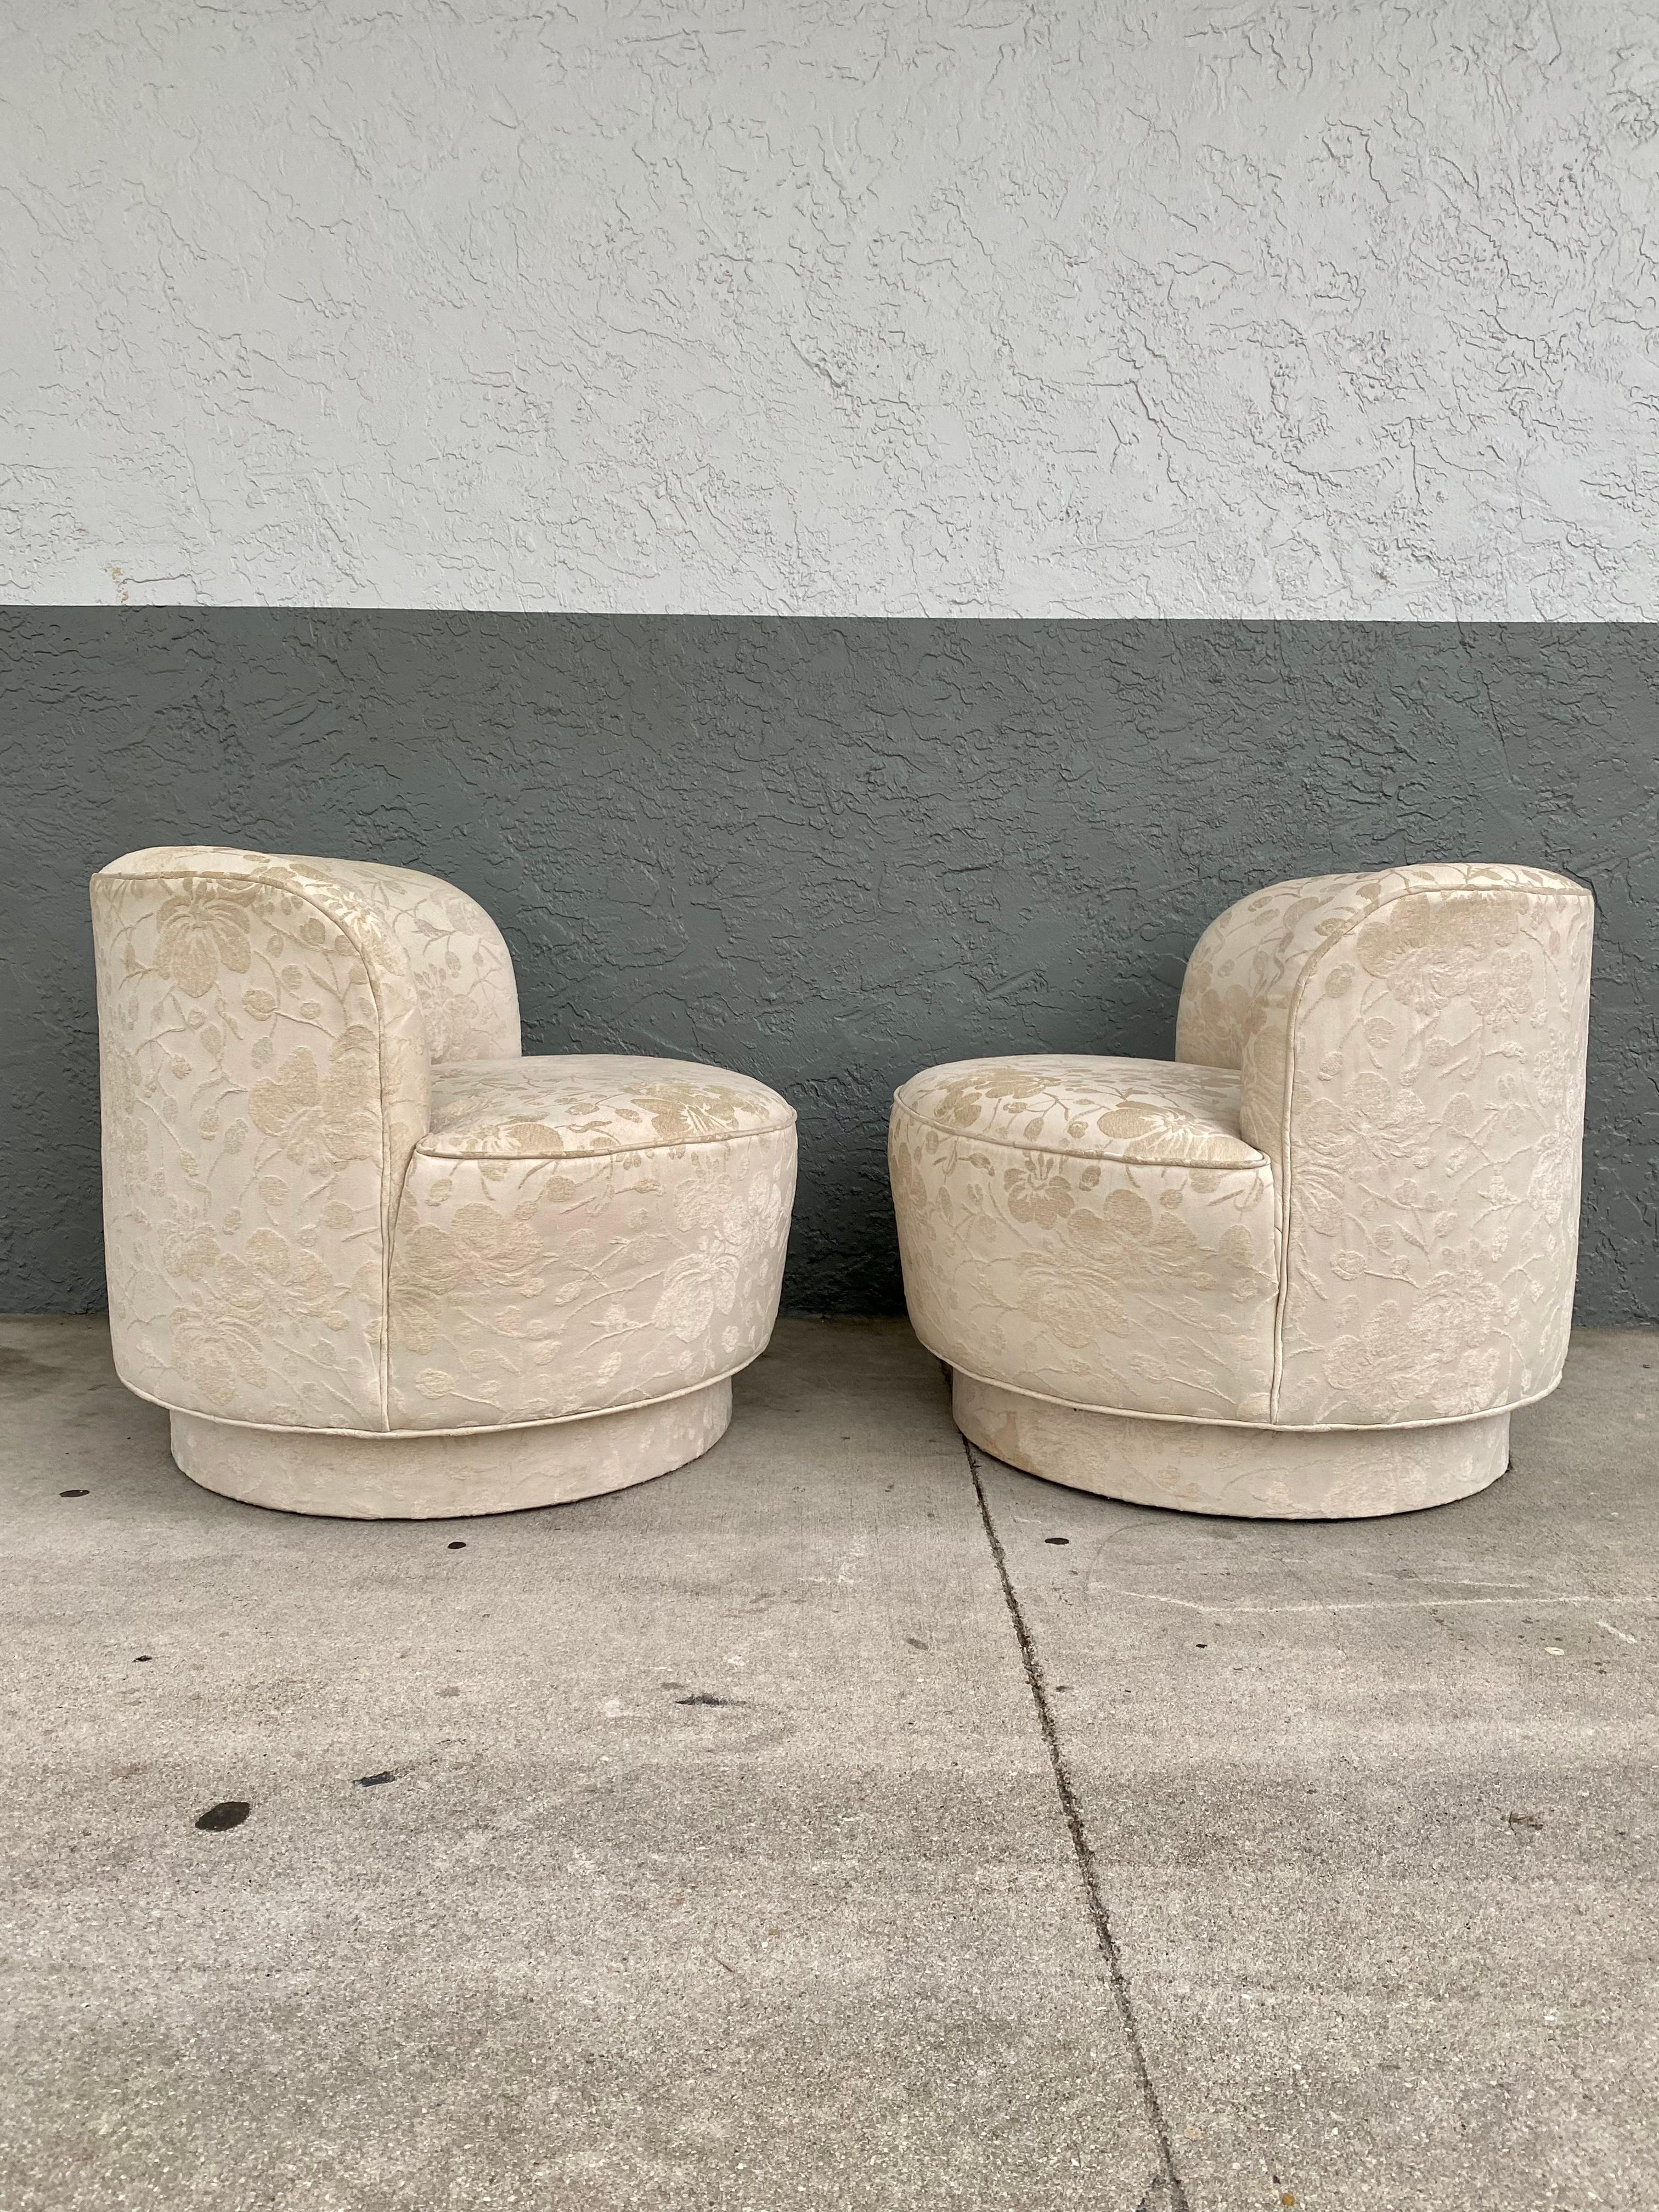 1980s Preview Embroidered Floral Sculptural Curved Swivel Chairs, Set of 2 In Good Condition For Sale In Fort Lauderdale, FL